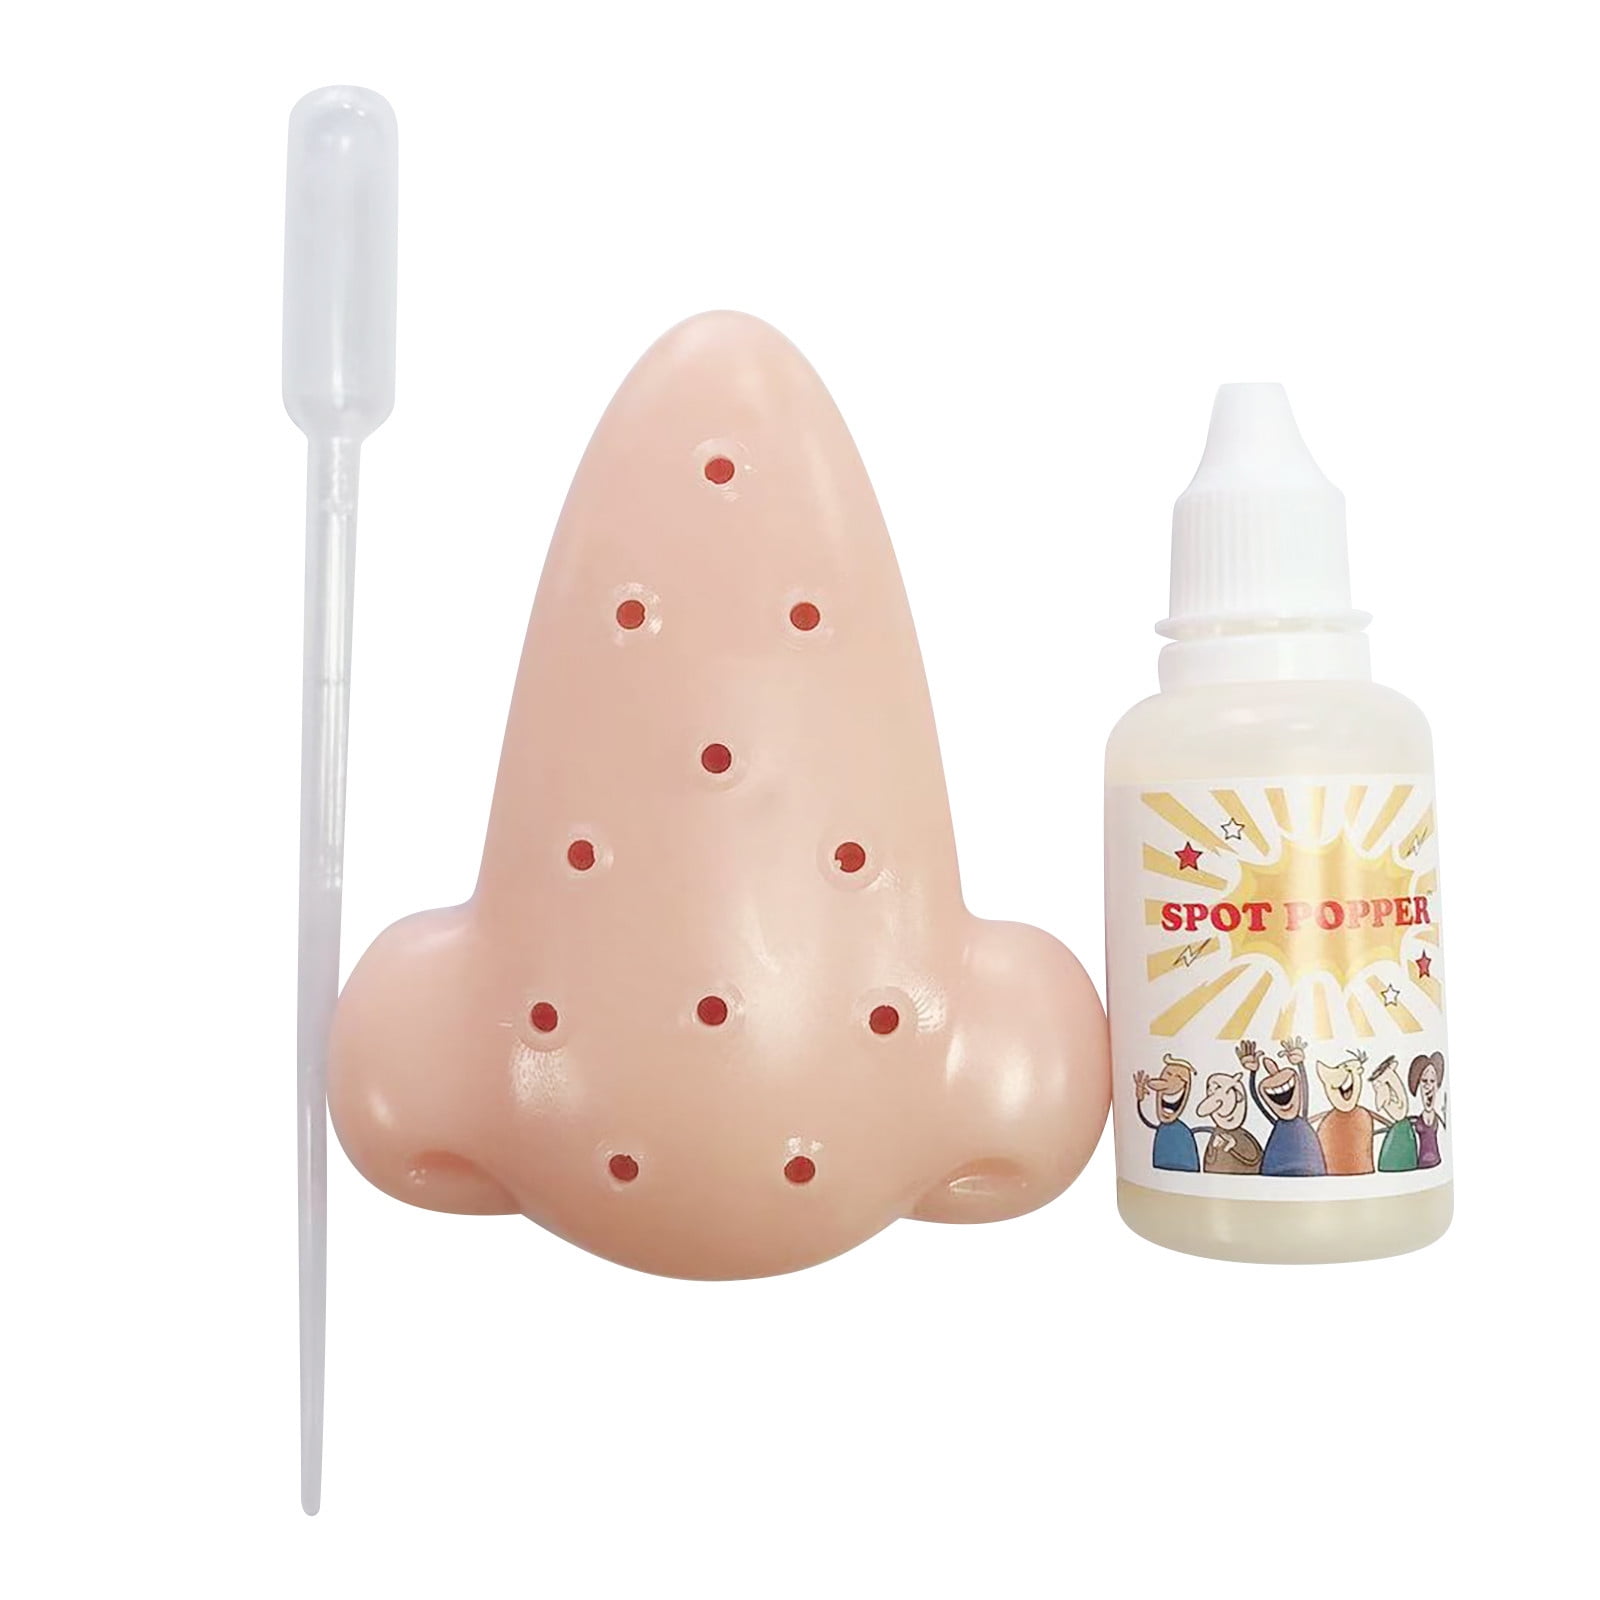 Unique Squeeze Acne Toys Pimple Kit Funny-Toy Remover Zit Tool 